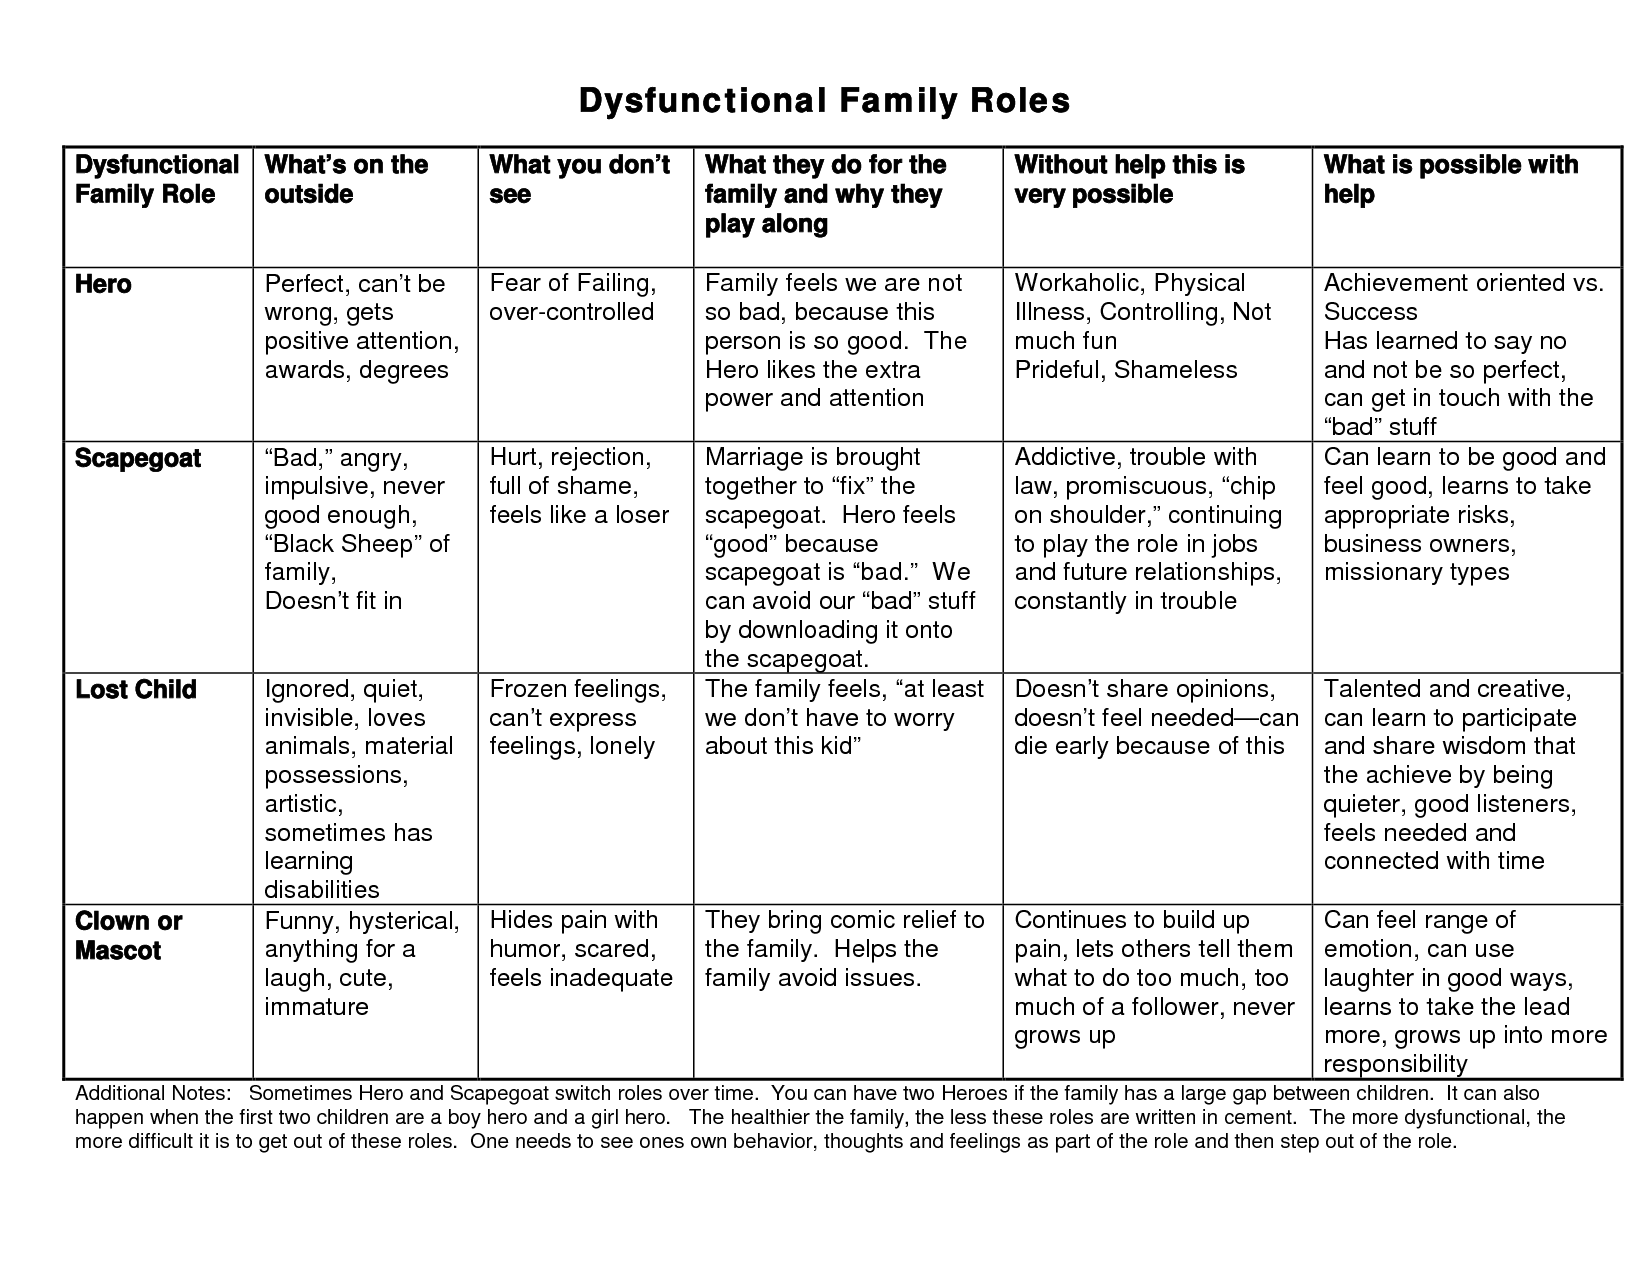 Dysfunctional Family Roles Chart Image